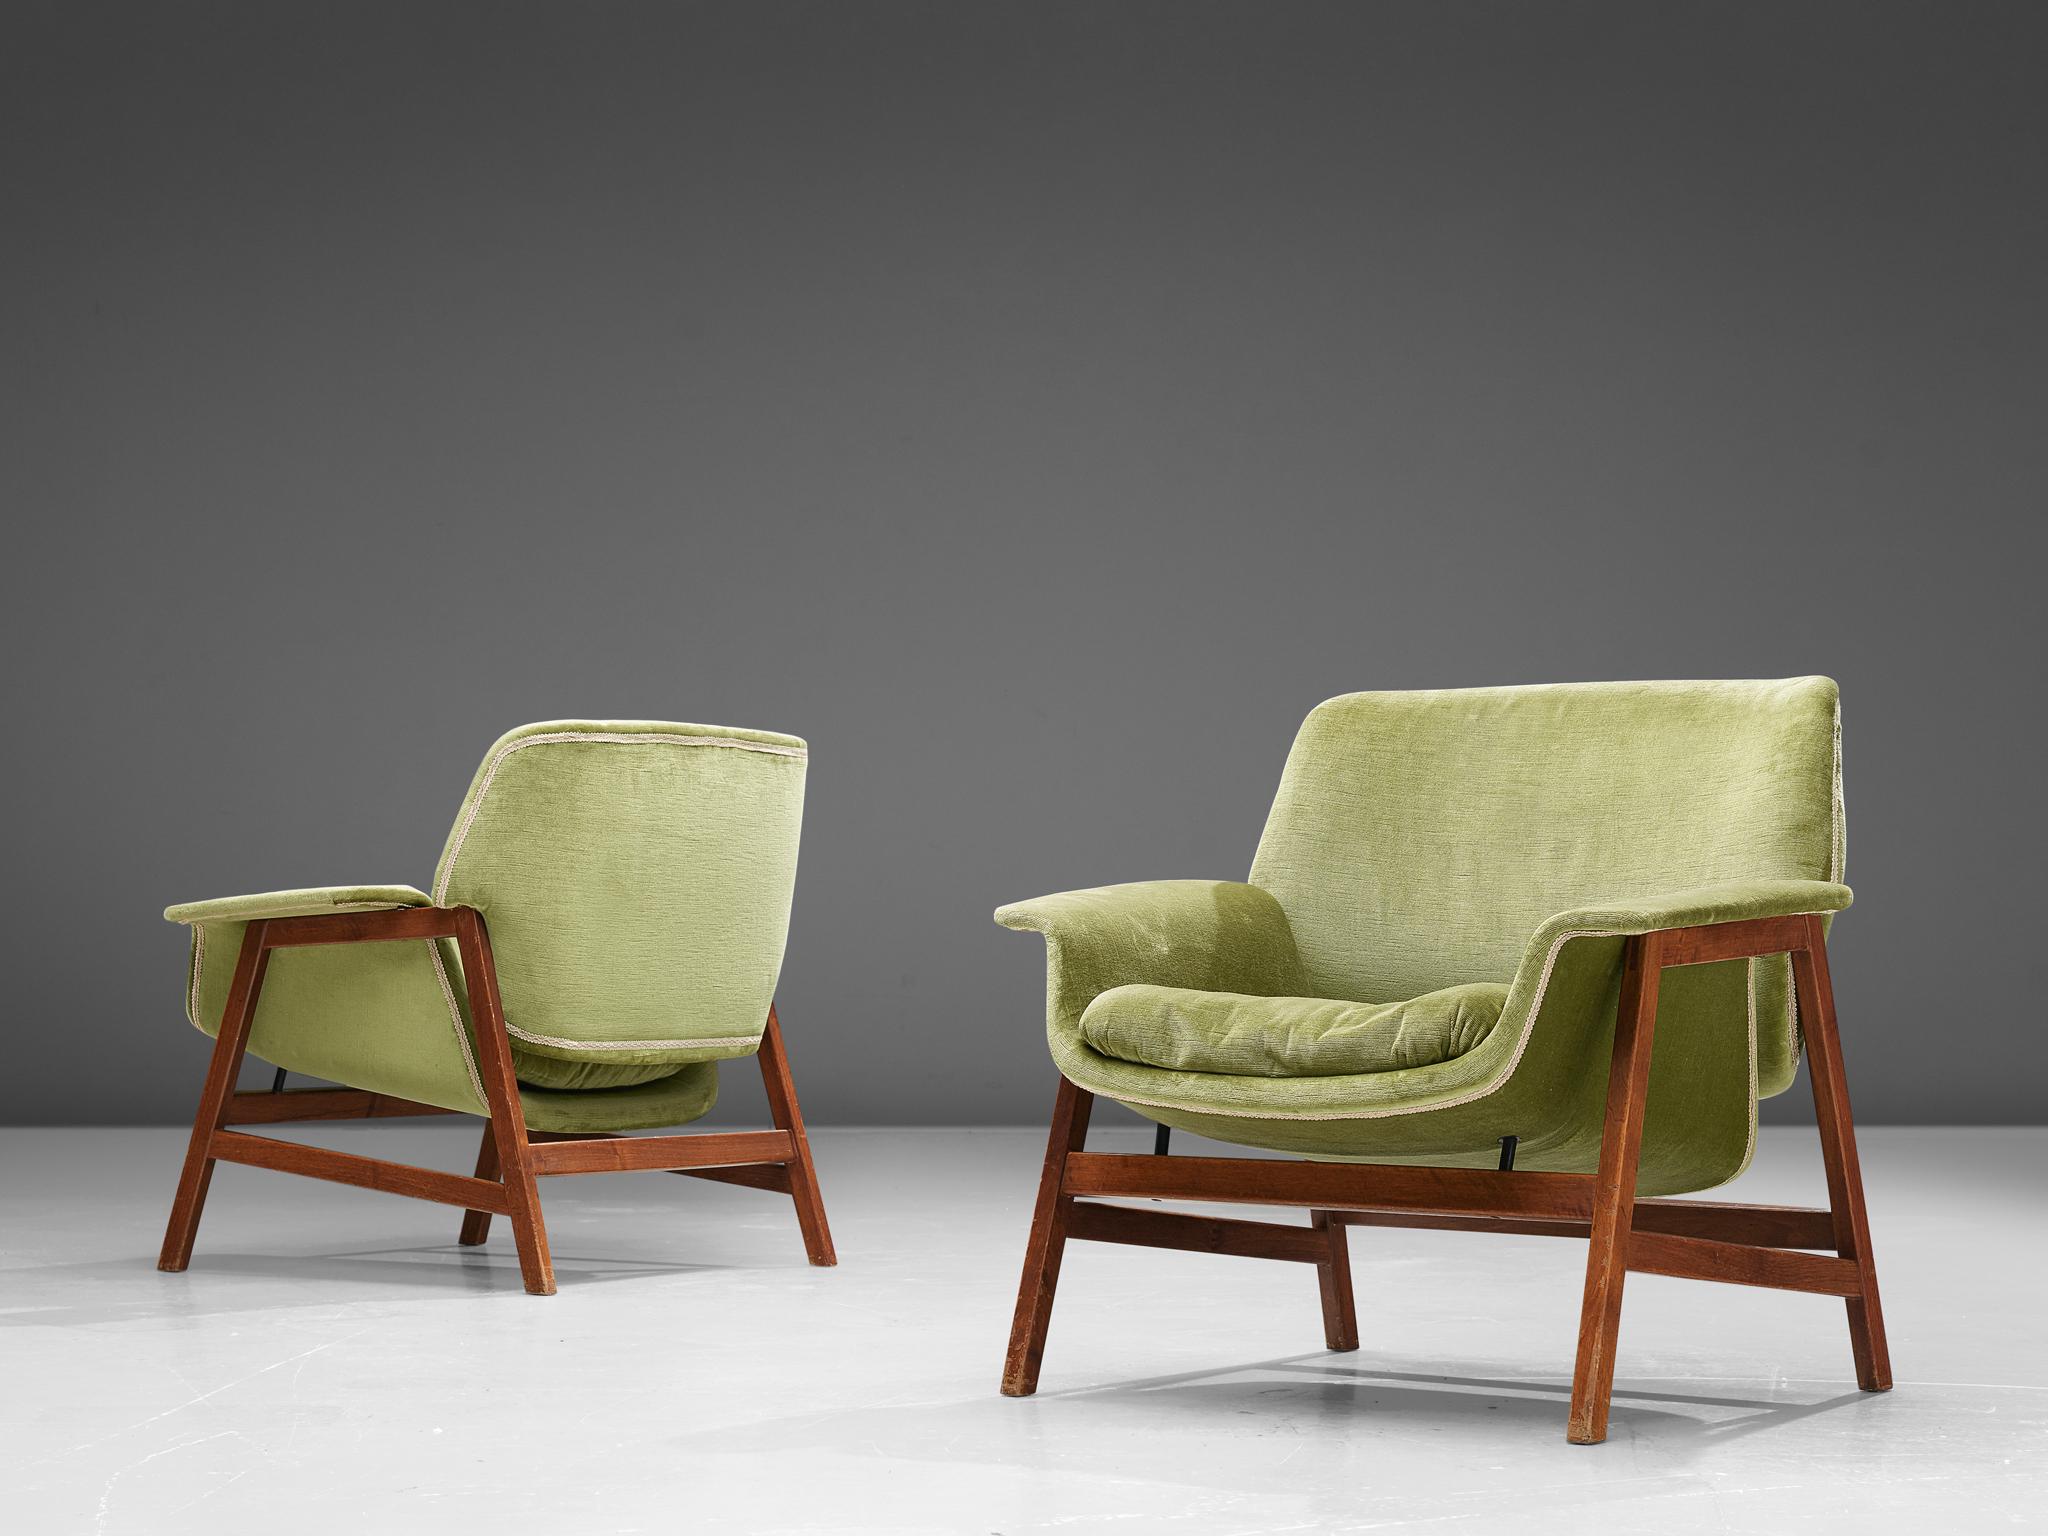 Gianfranco Frattini for Cassina, '849' easy chairs, walnut and fabric, Italy, 1956.

Wonderful pair of chairs by Gianfrano Frattini for Cassina. This model features a walnut frame which holds the seat and backrest. A shell forms the seat in an